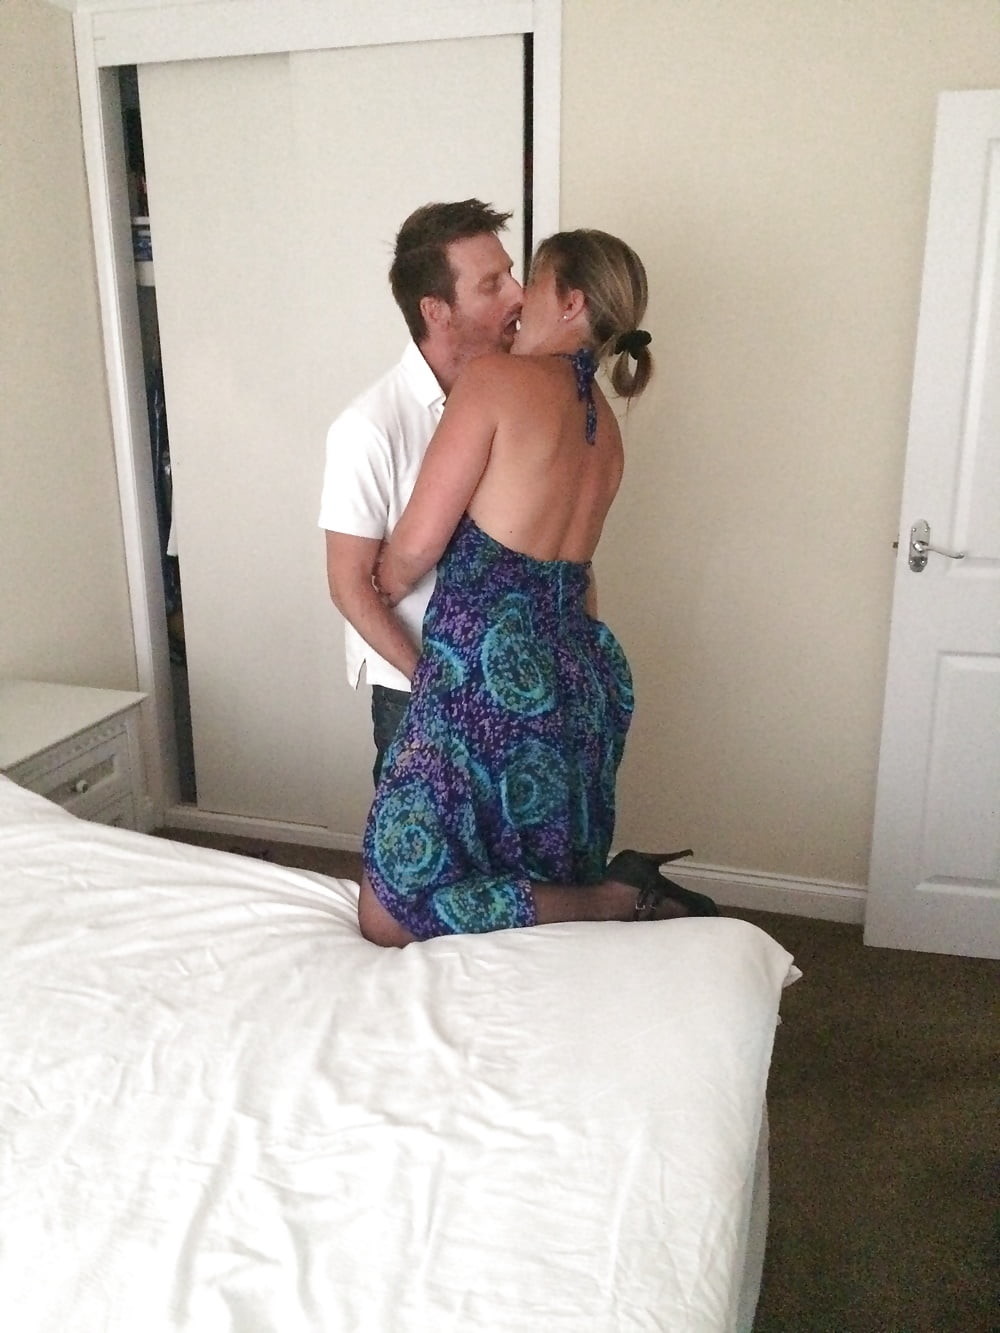 hotwife swinging kissing foreplay Sex Pics Hd